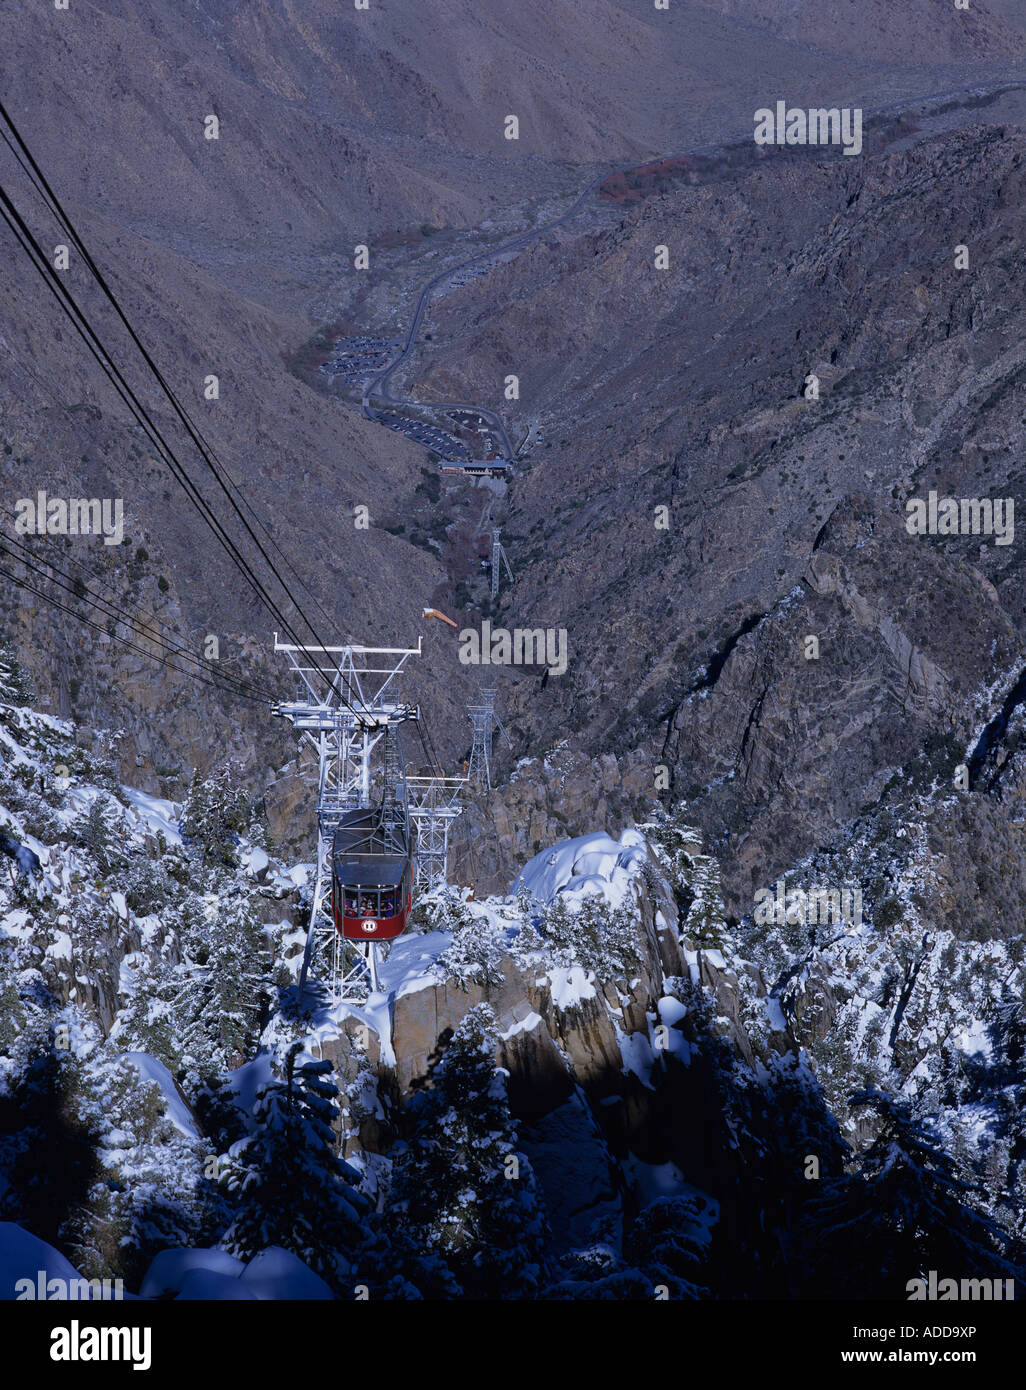 Retro image Aerial tramway moving up on cables from the valley floor up to Mount San Jacinto Palm Springs California State USA Stock Photo